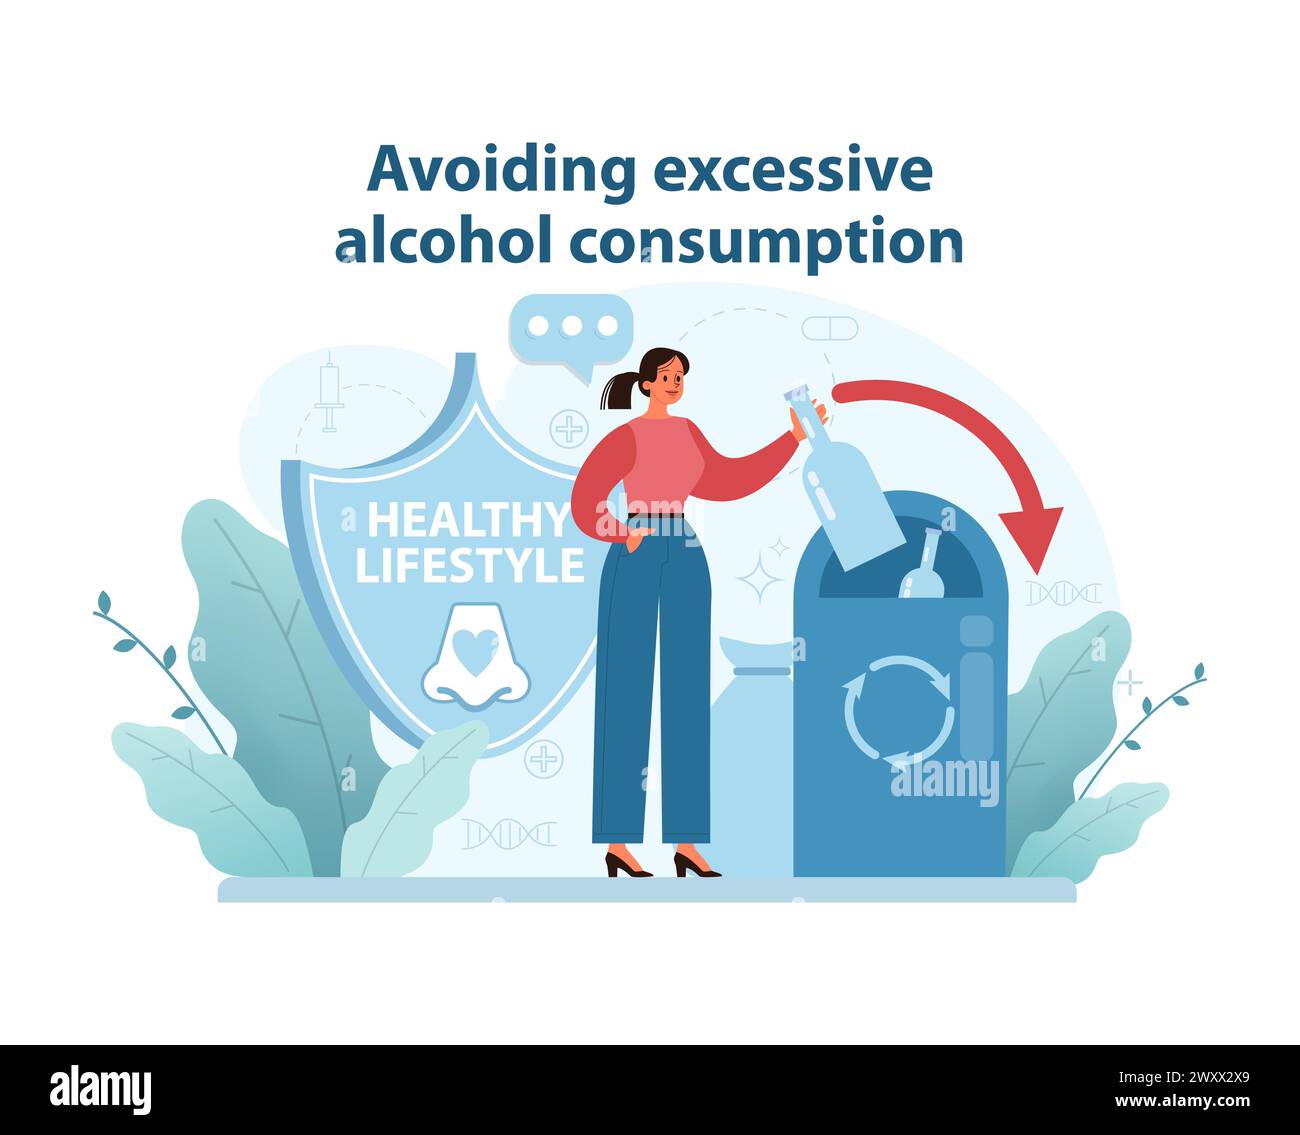 Alcohol Moderation Illustration. A woman discards a bottle into a recycling bin, advocating for moderate alcohol consumption as part of a healthy lifestyle. Stock Vector